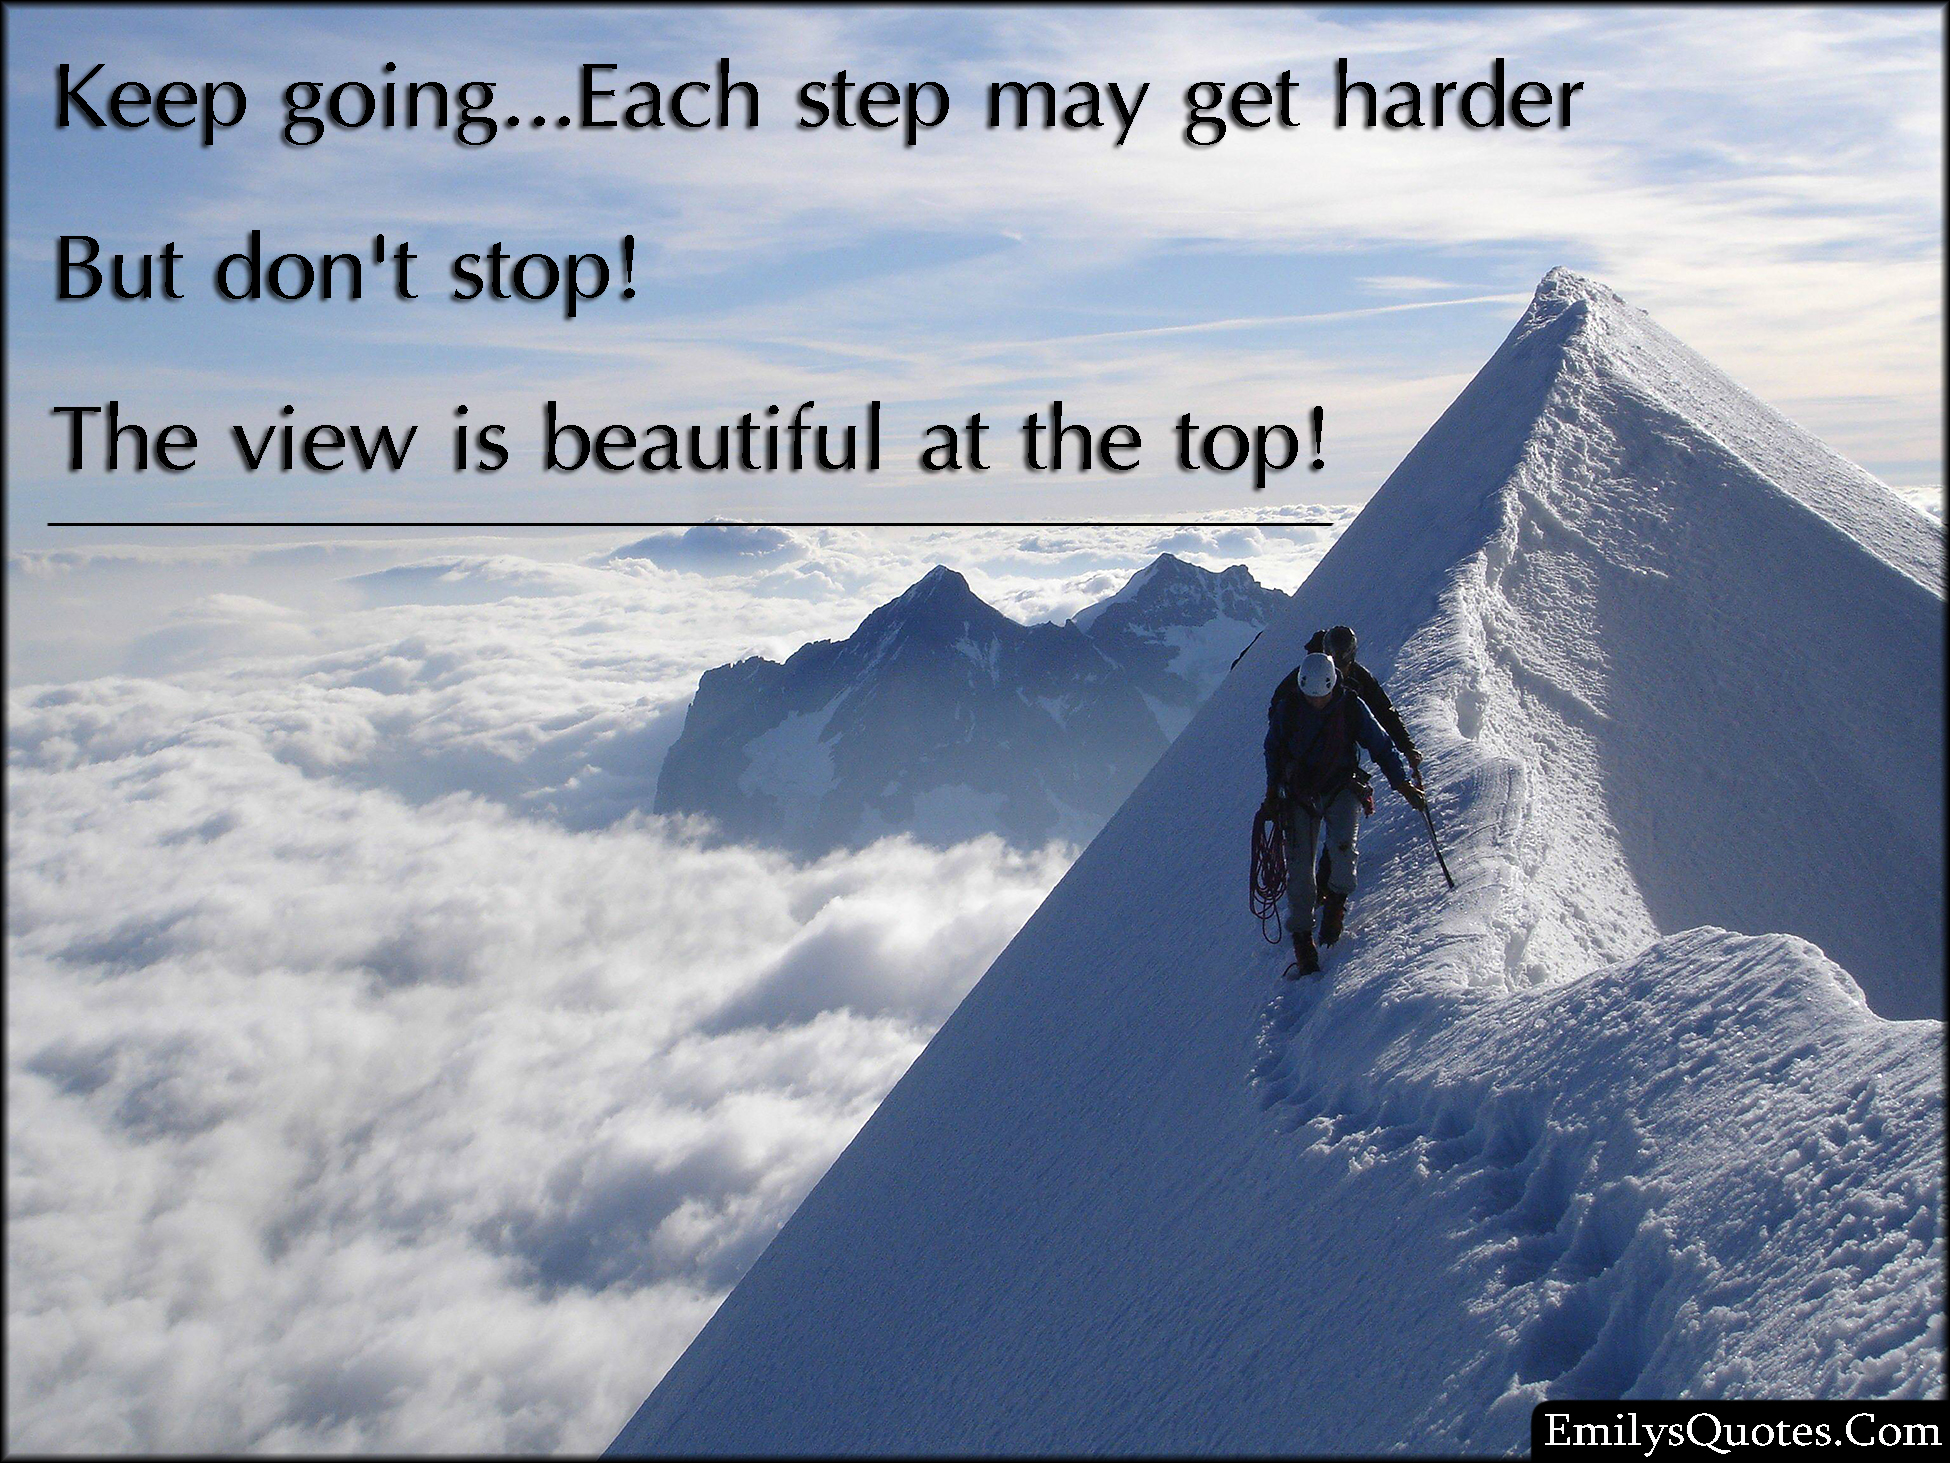 Keep going…Each step may get harder But don’t stop! The view is